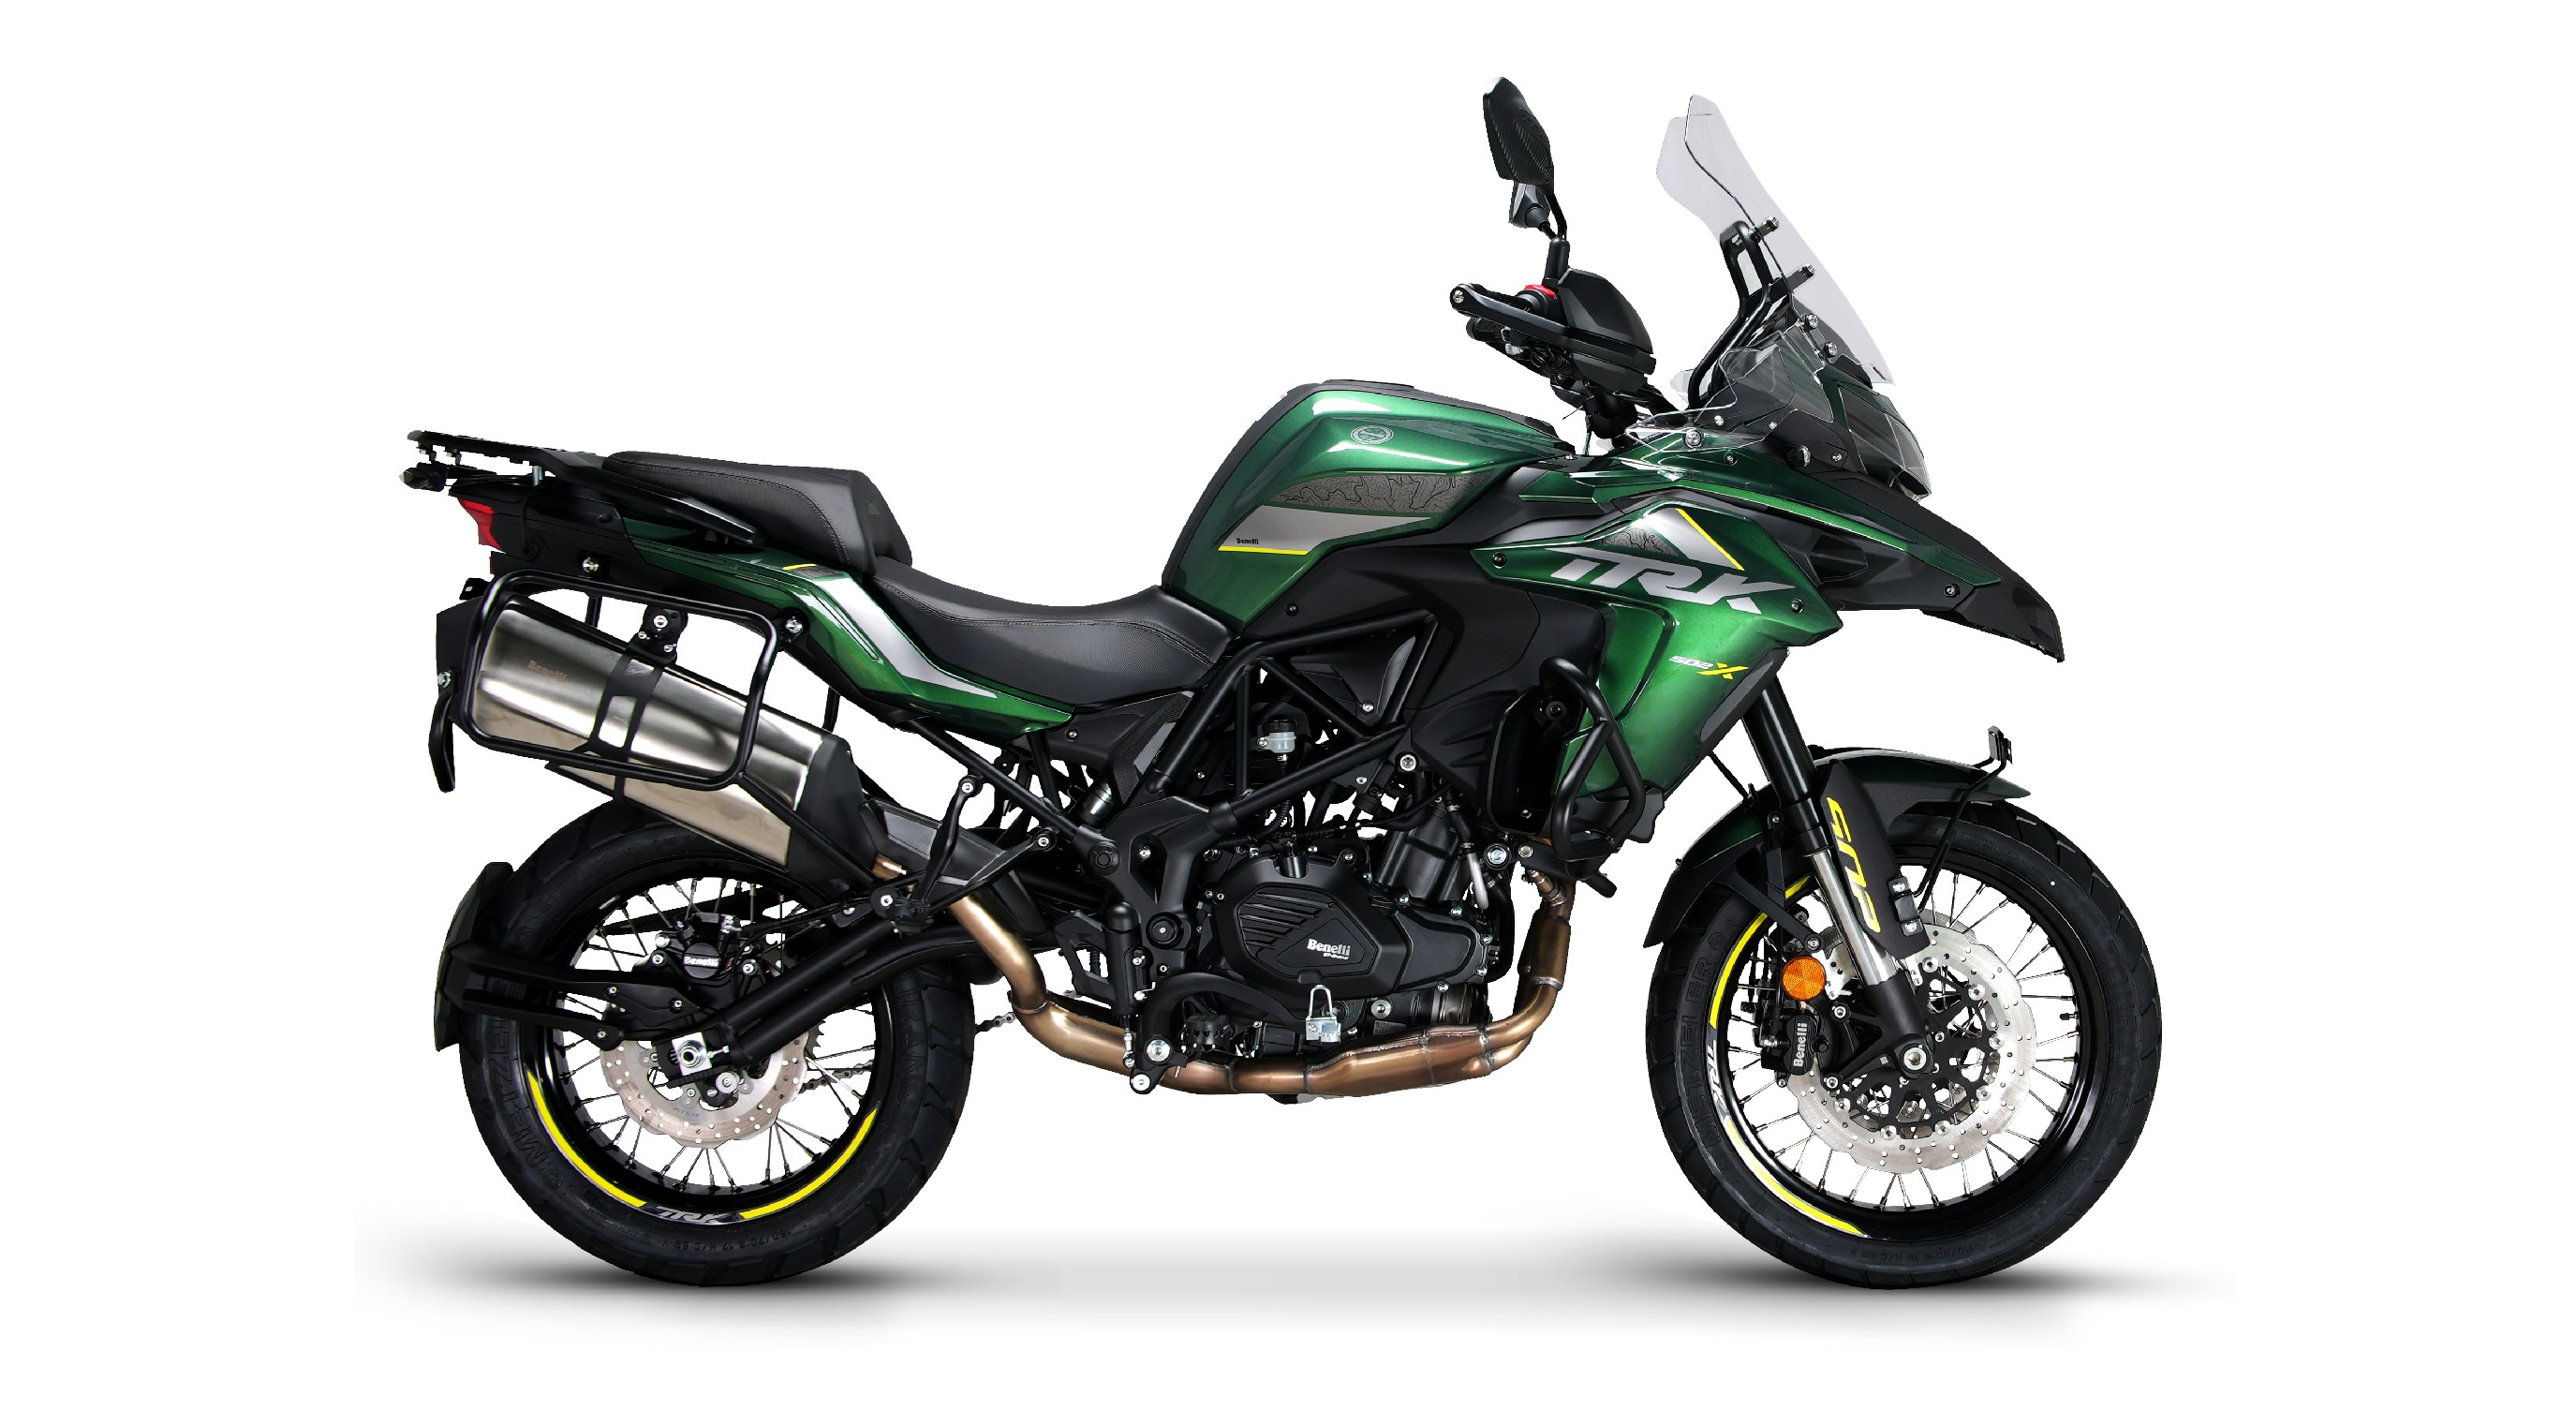 The 2023 Benelli TRK 502X is now available in a new Forest Green shade in addition to the existing three colours